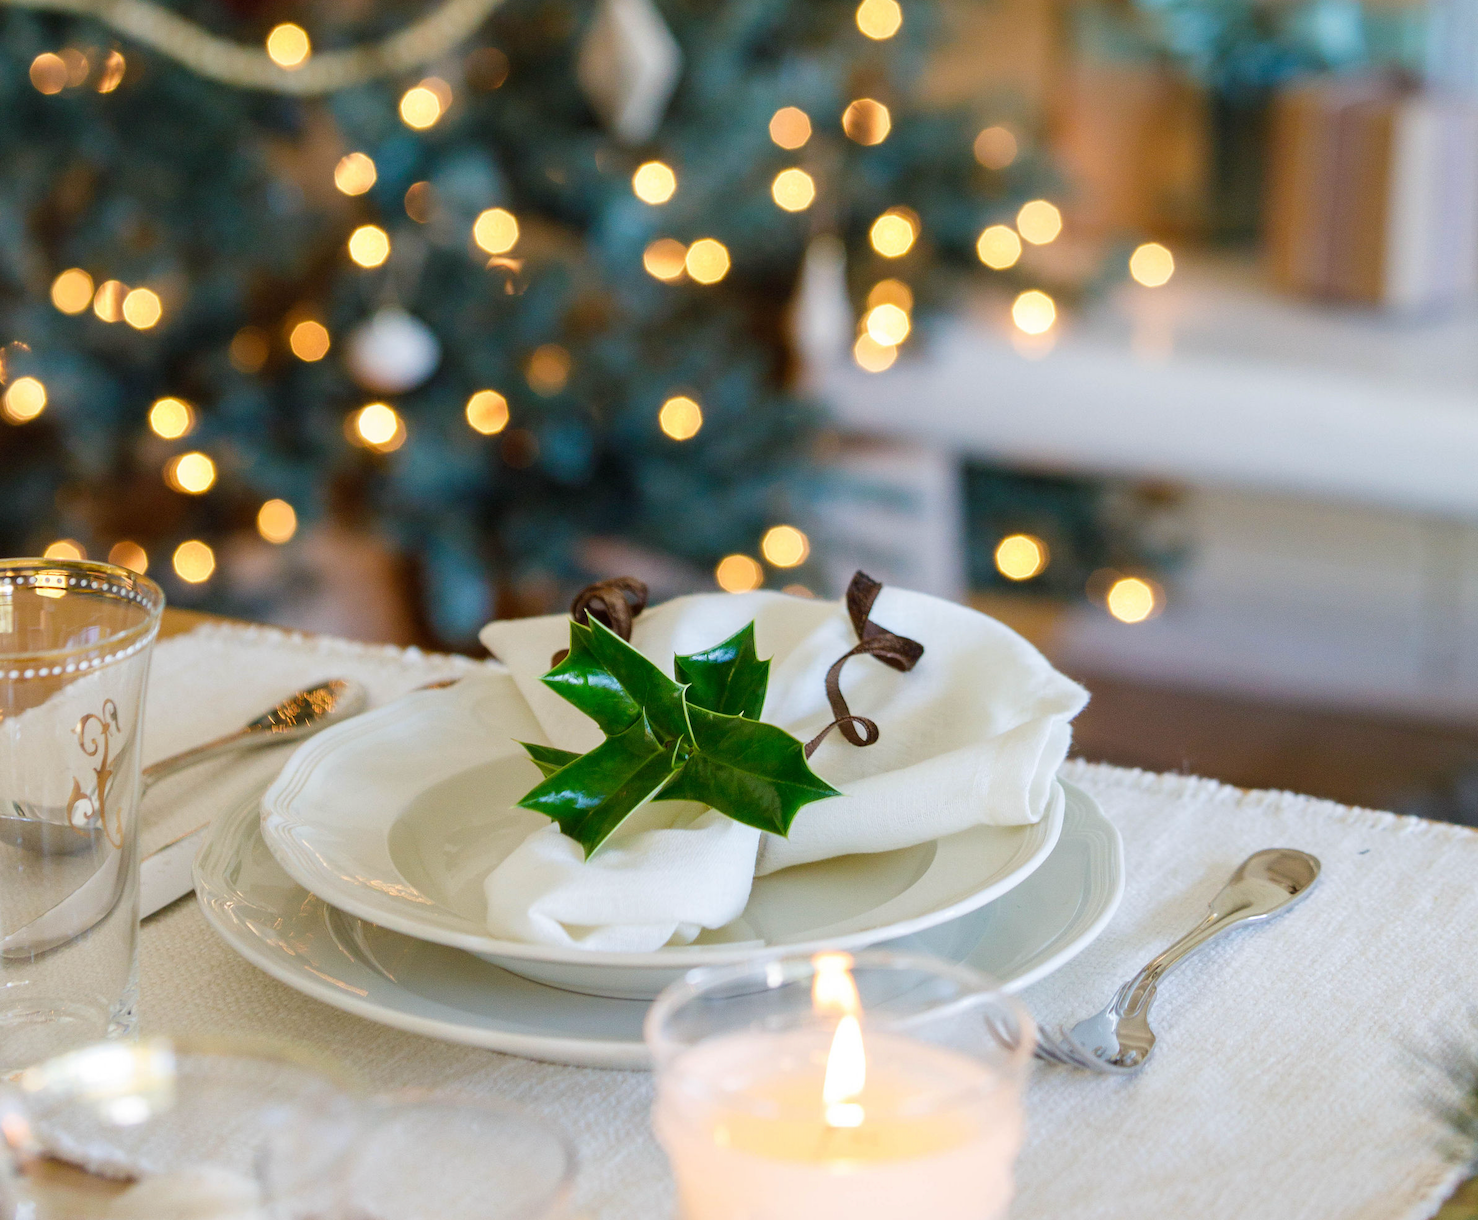 Crafting a Winter White Tablescape for a December Soirée